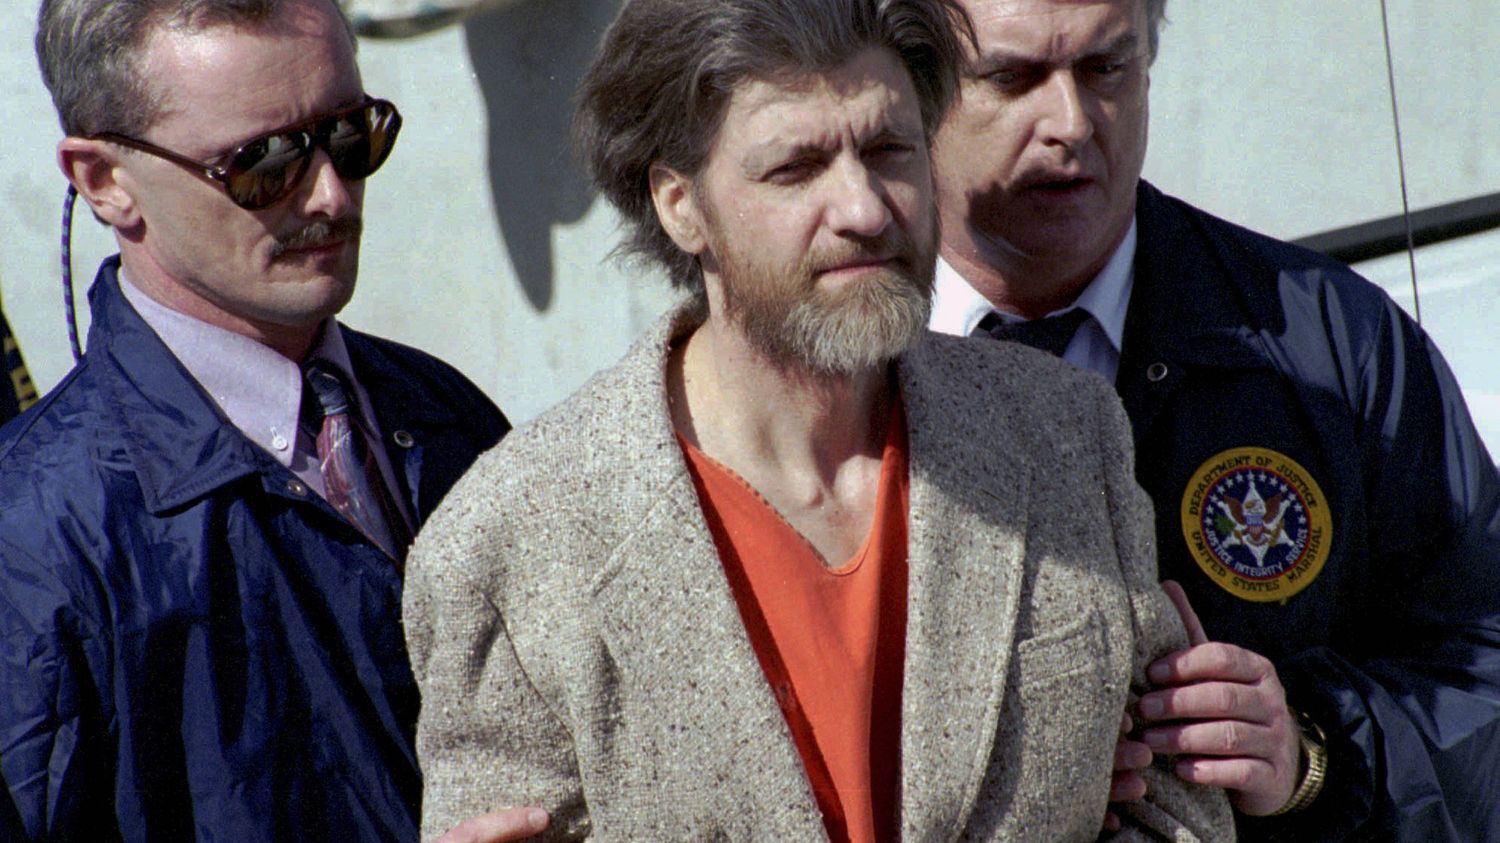 The American "Unabomber", whose attacks traumatized the United States, found dead in prison